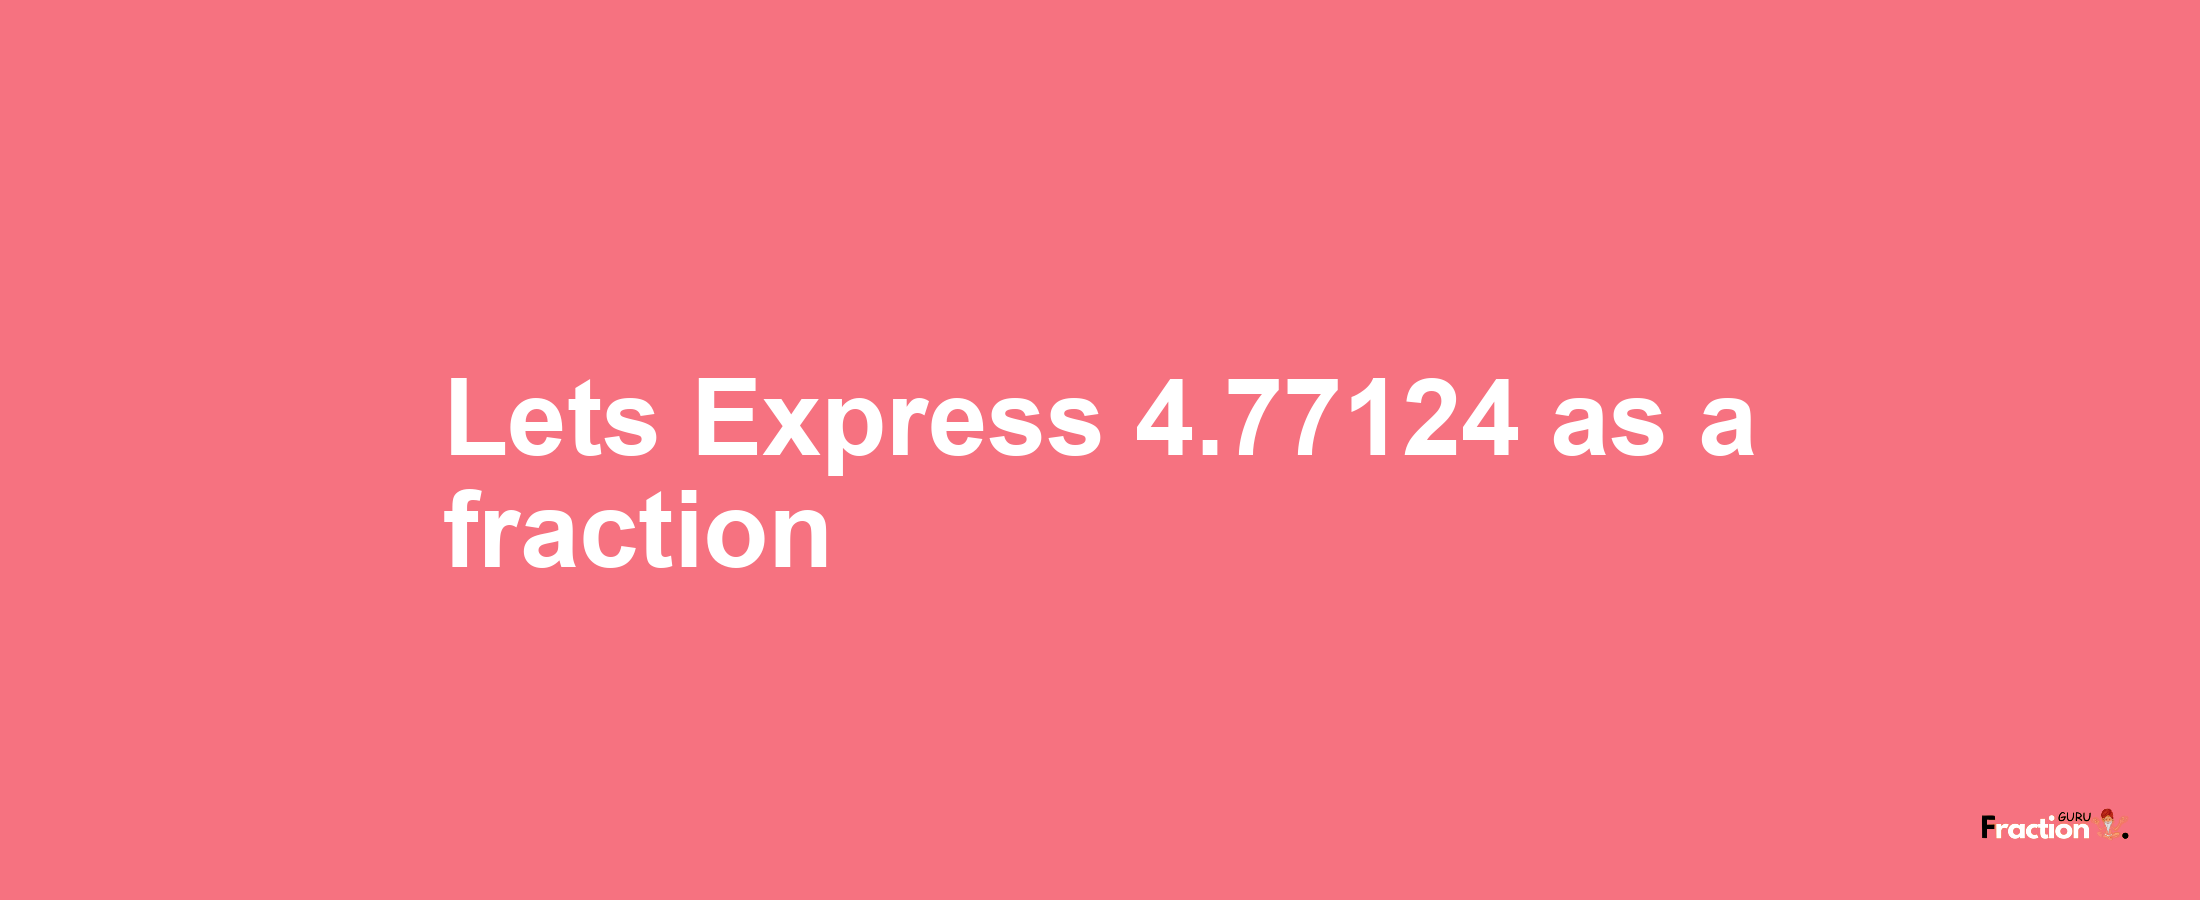 Lets Express 4.77124 as afraction